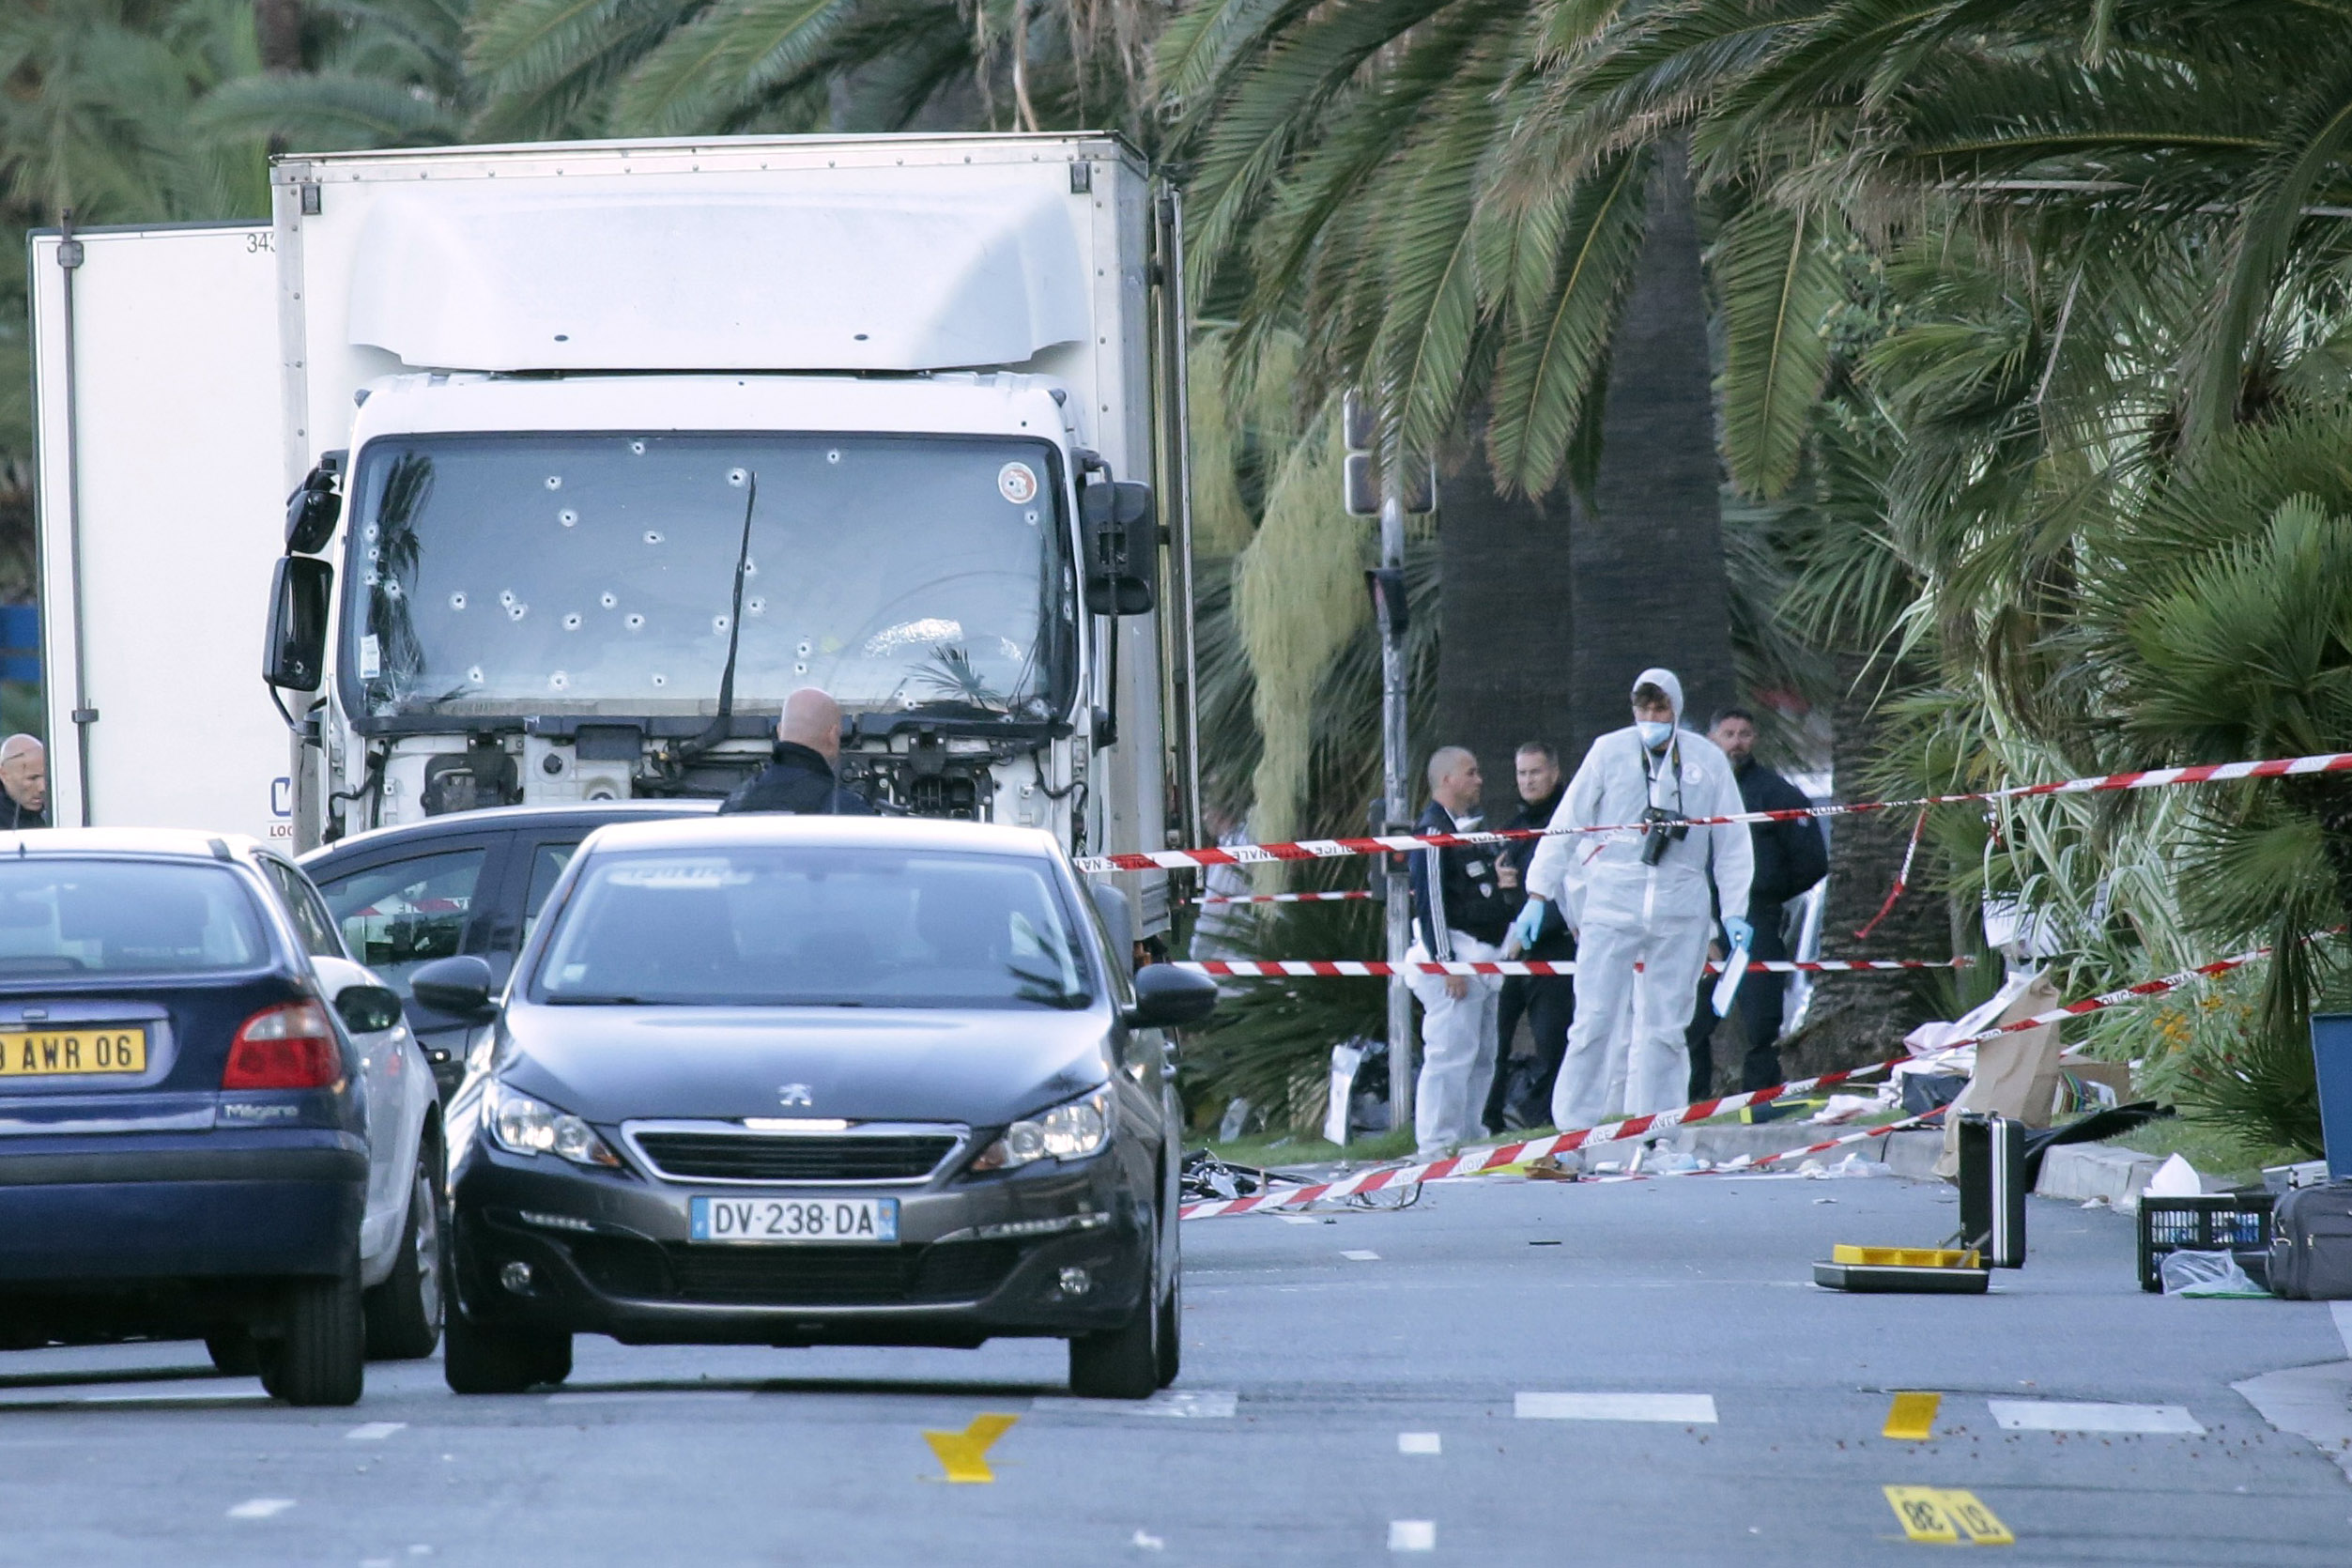 PHOTO: Forensic police investigate a truck at the scene of a terror attack on the Promenade des Anglais, July 15, 2016 in Nice, France.